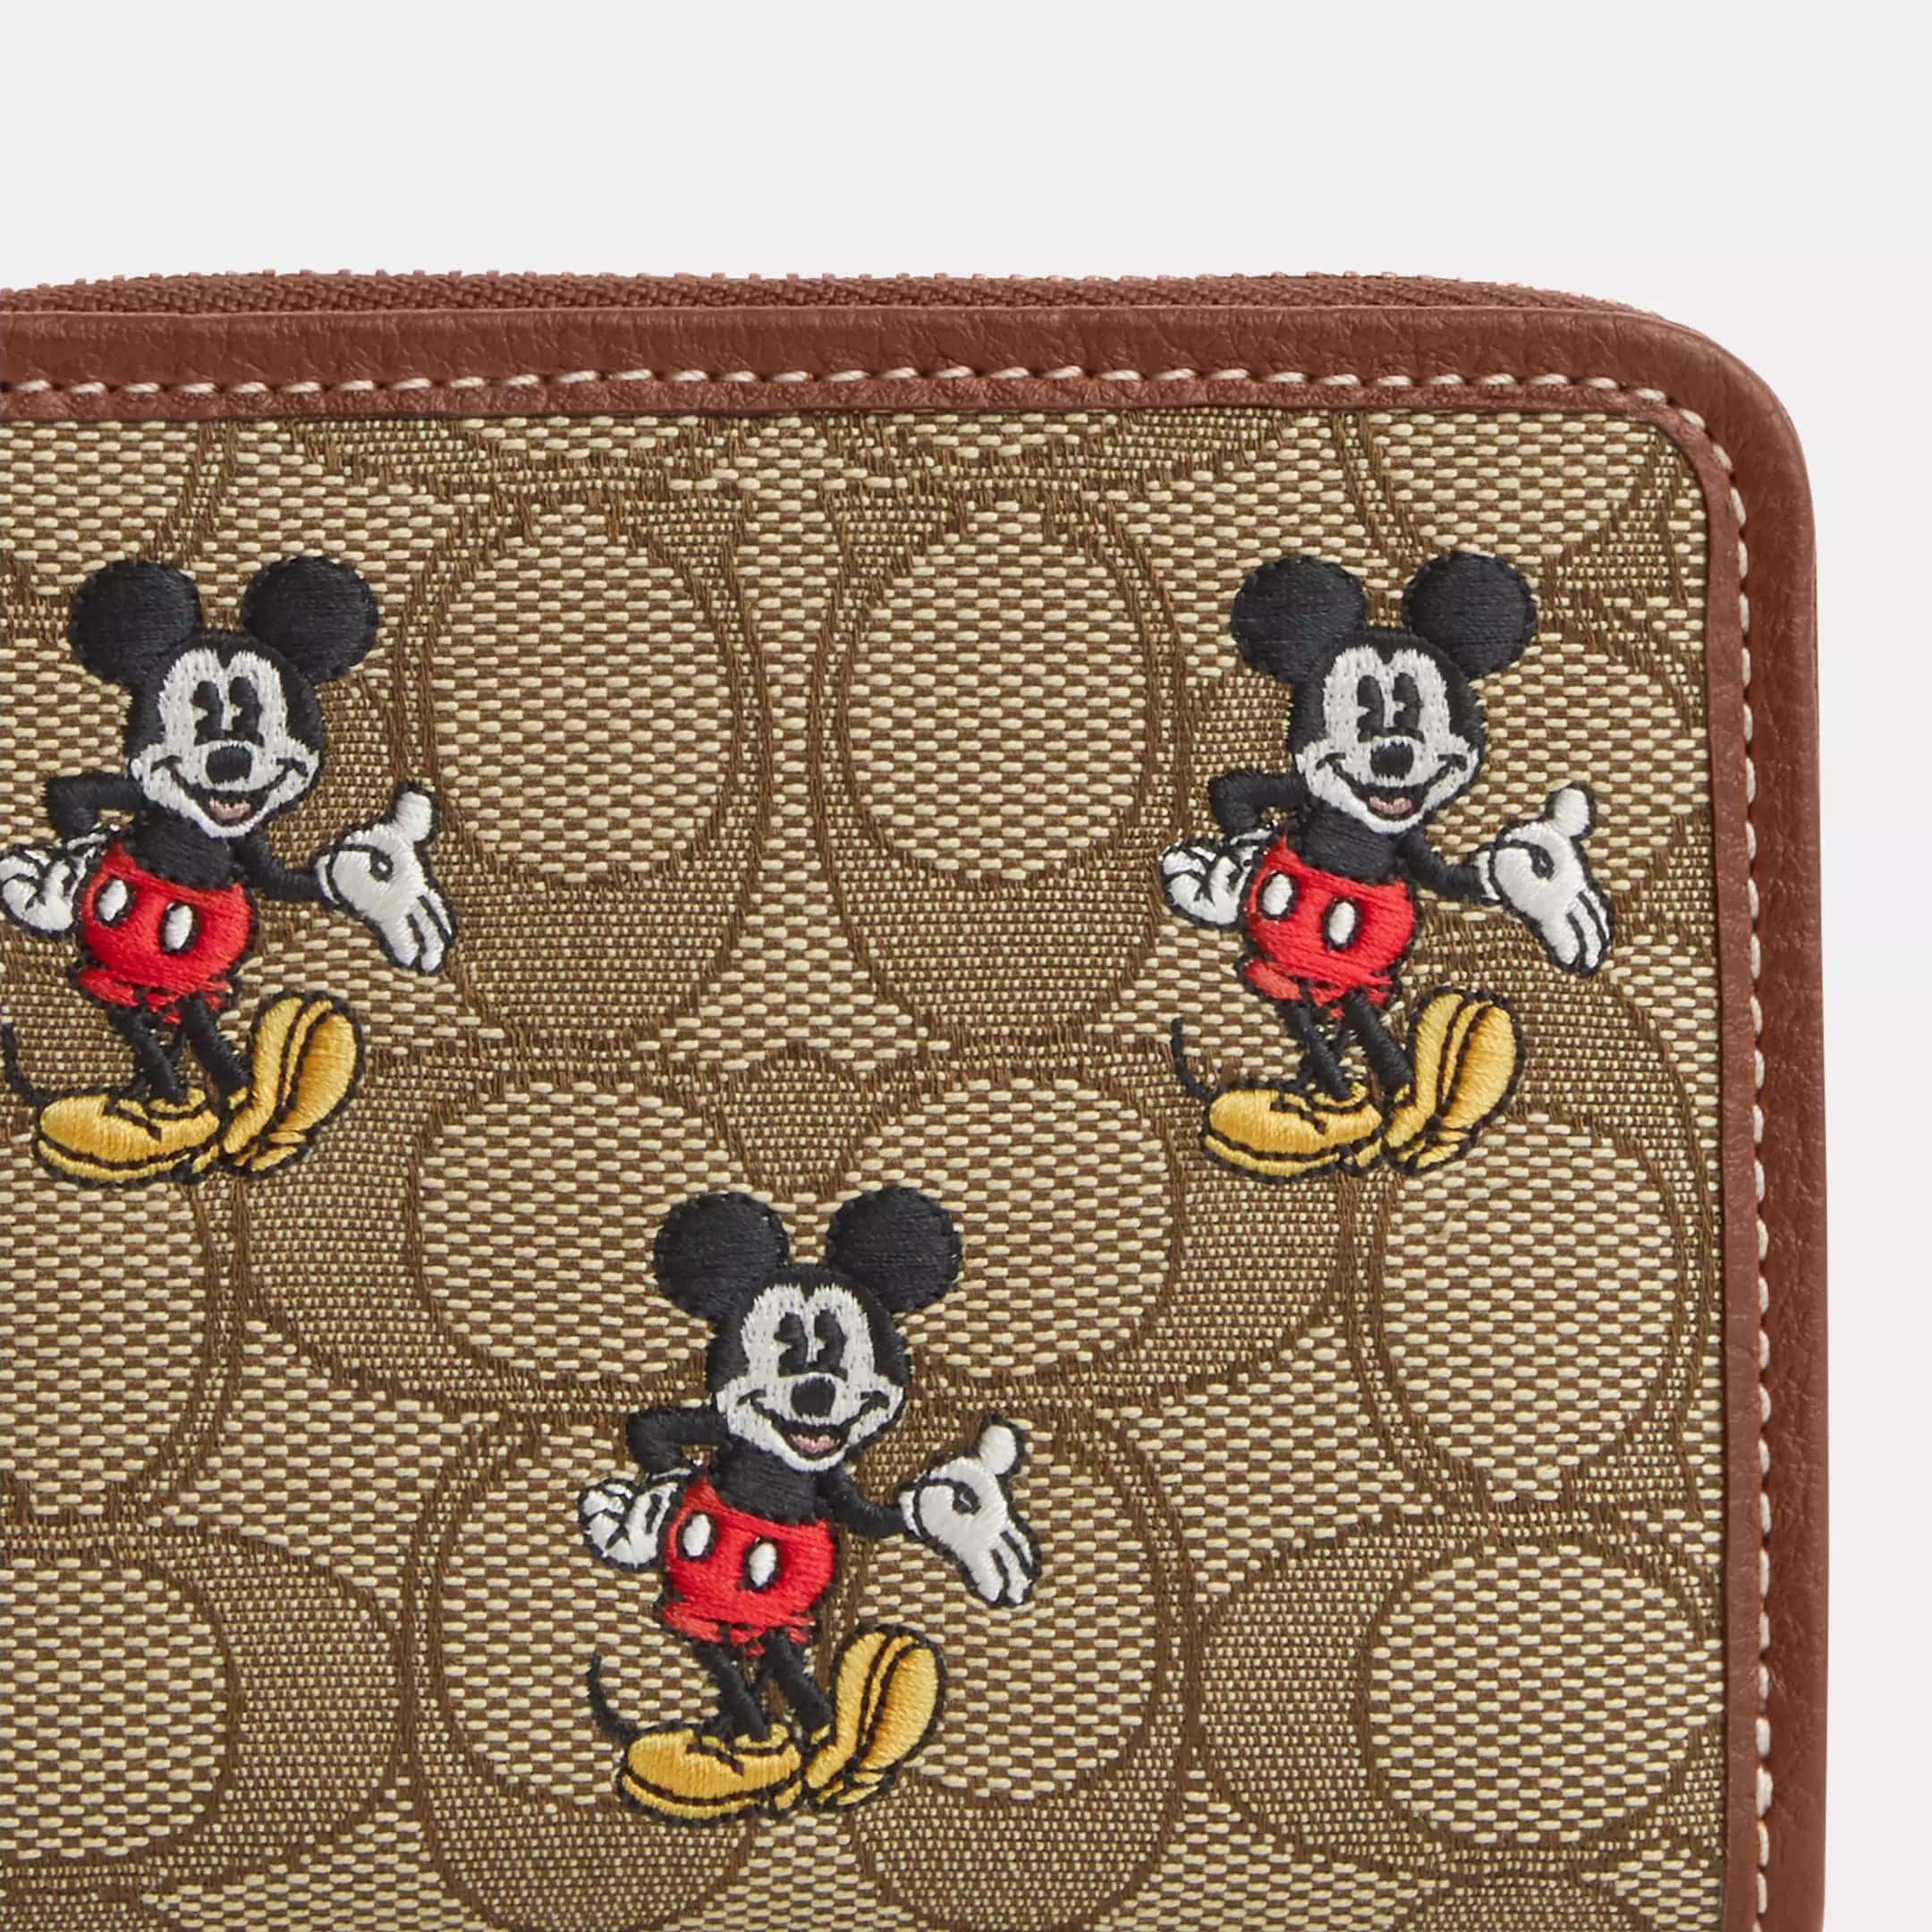 VÍ NỮ NGẮN DISNEY X COACH SMALL ZIP AROUND WALLET IN SIGNATURE JACQUARD WITH MICKEY MOUSE PRINT CN035 3